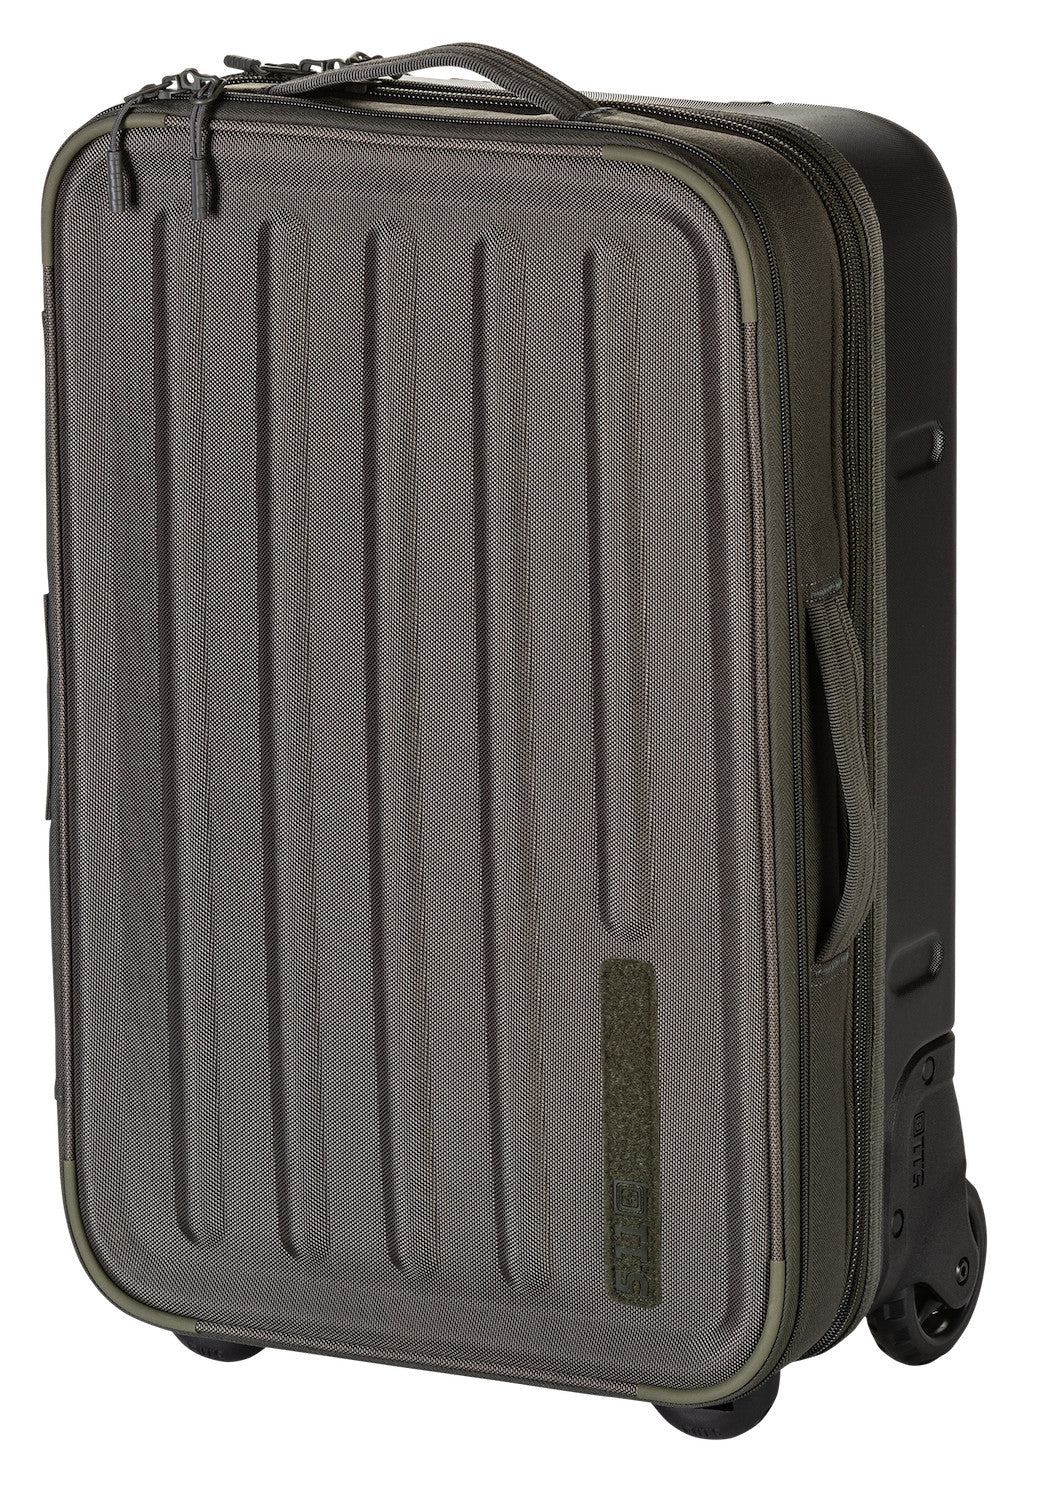 56435 - Load Up 22" Carry On Luggage